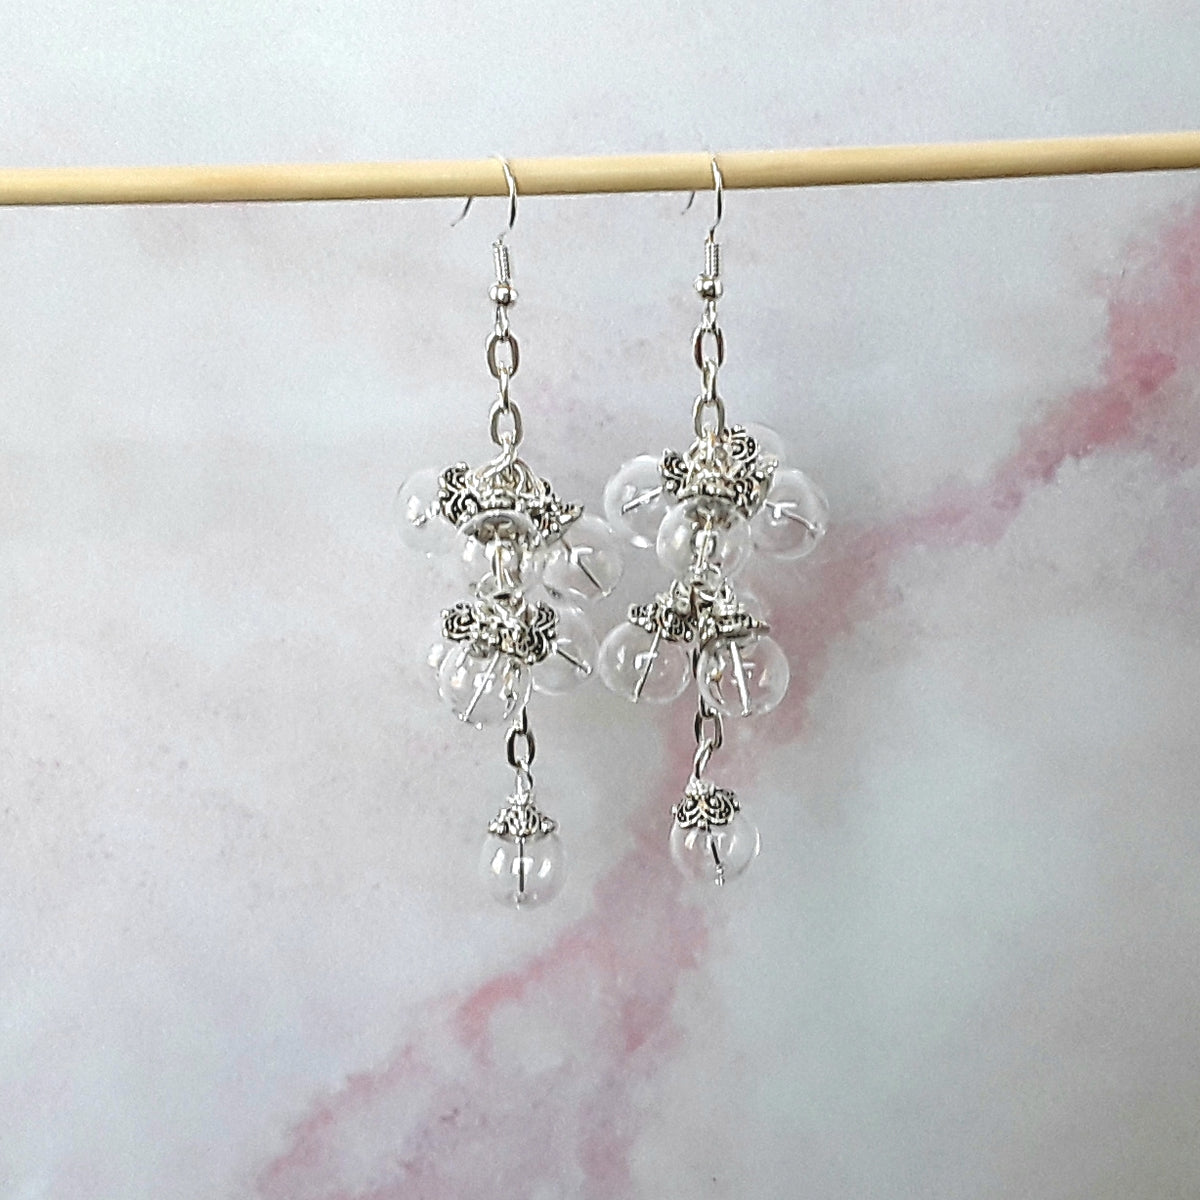 Clear Glass Bubble Chandelier Earrings in Gold or Silver - Unique Bridal Statement Dangles